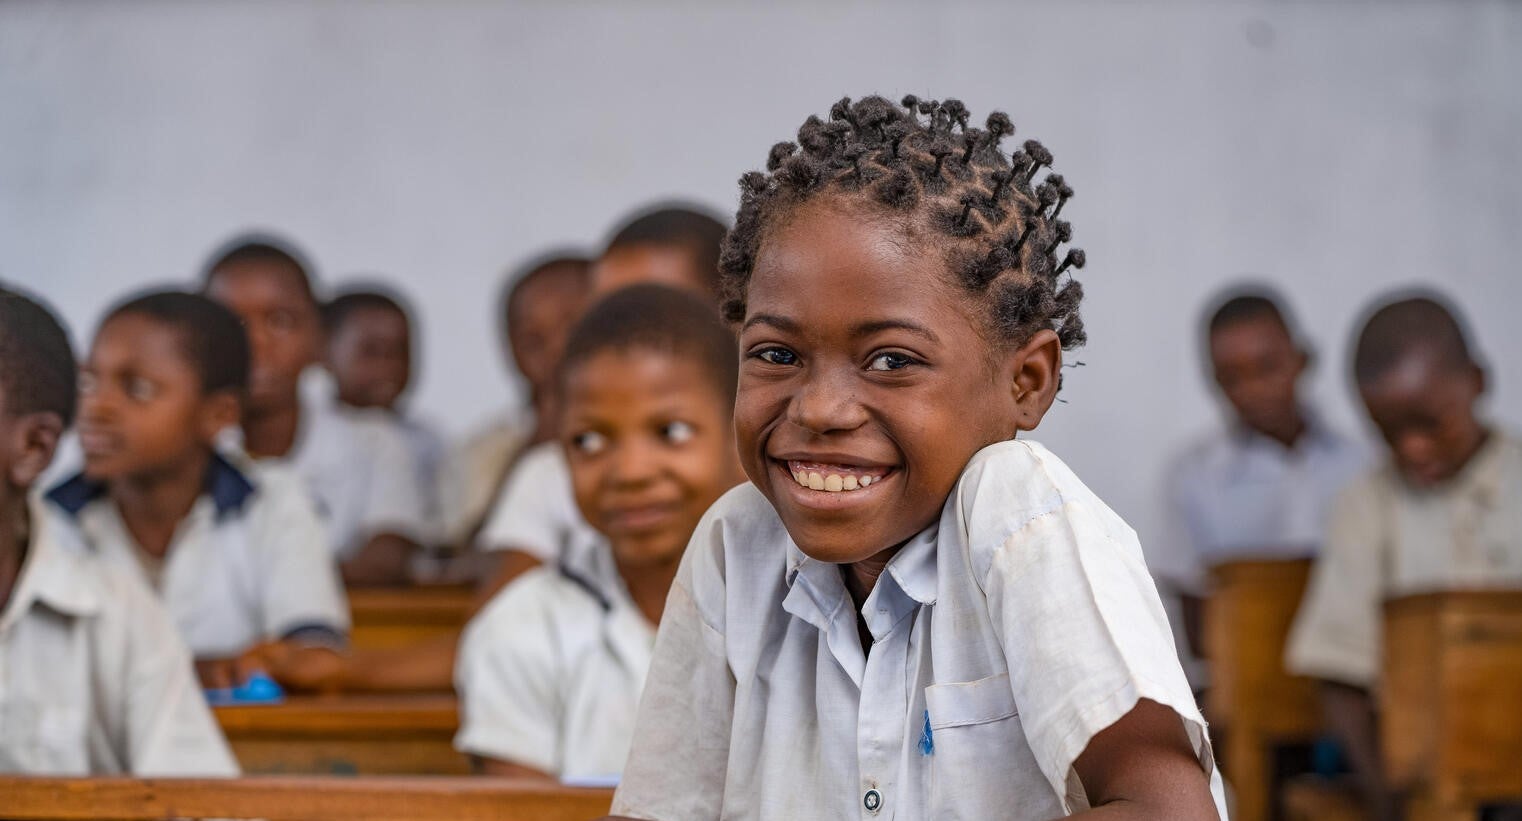 A school student in DRC smiling at the camera